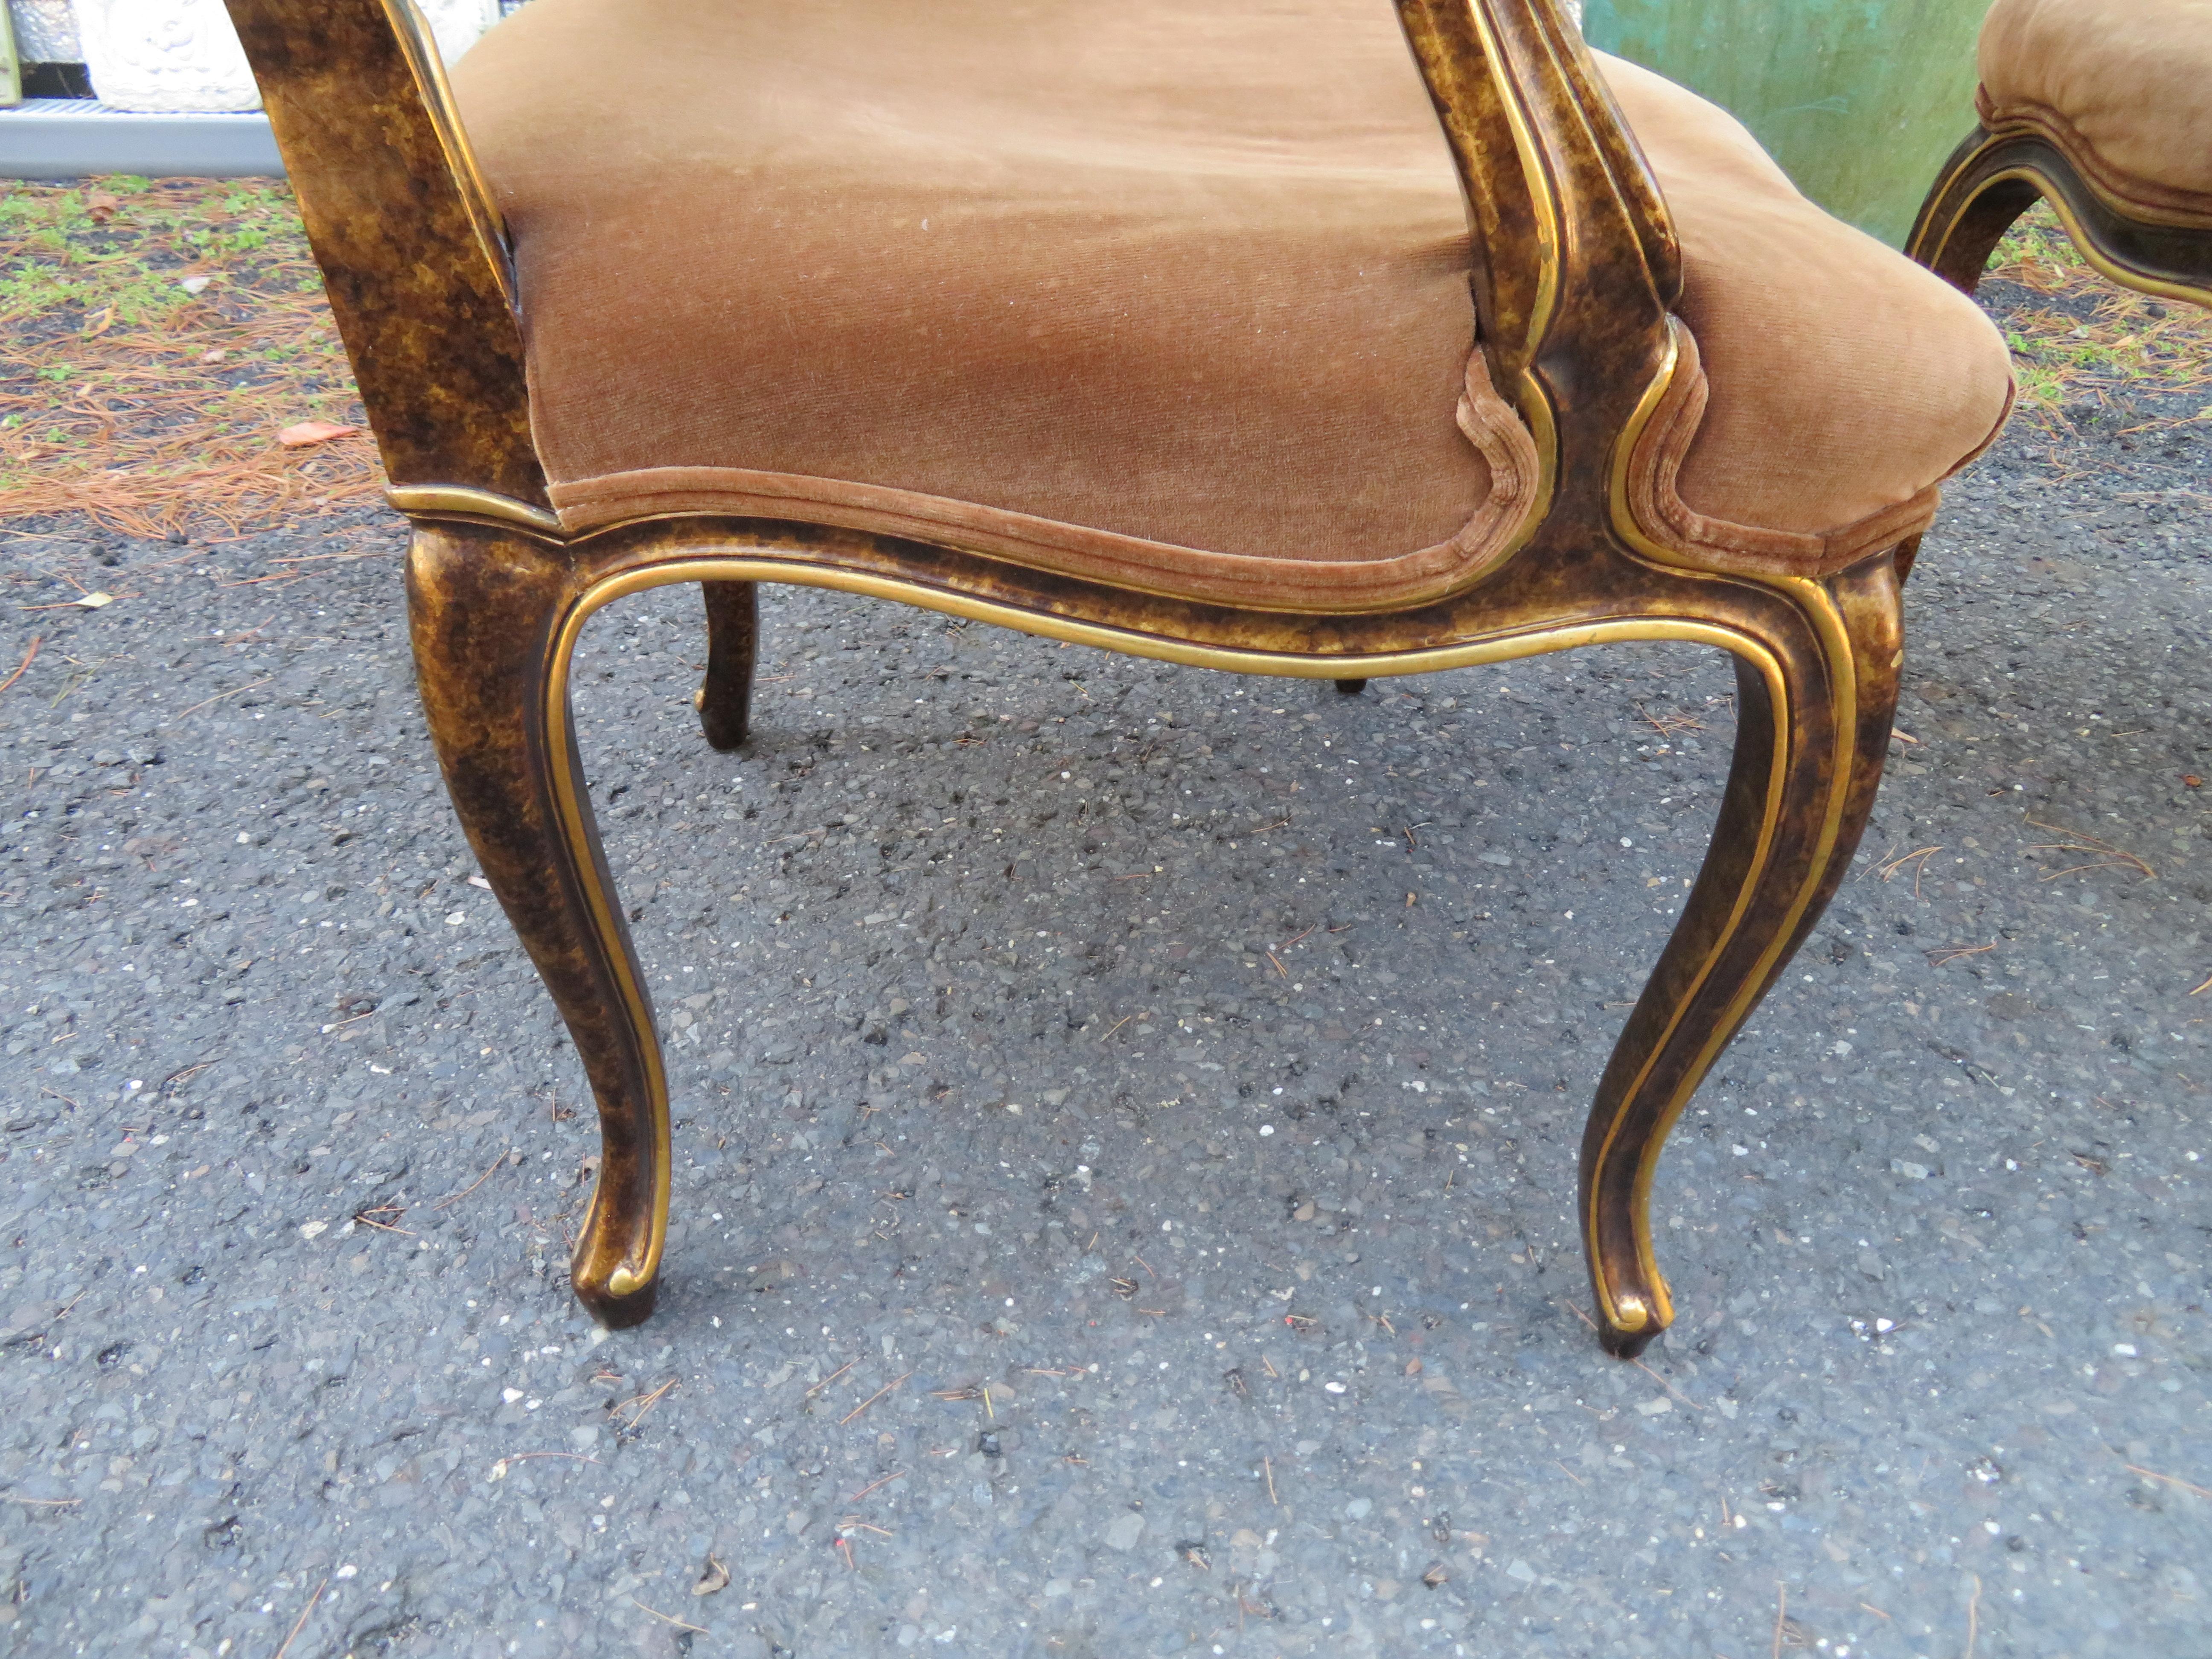 Upholstery Spectacular Pair Widdicomb Louis XV Fauteuil Chairs Tortoise Shell Caned Back For Sale